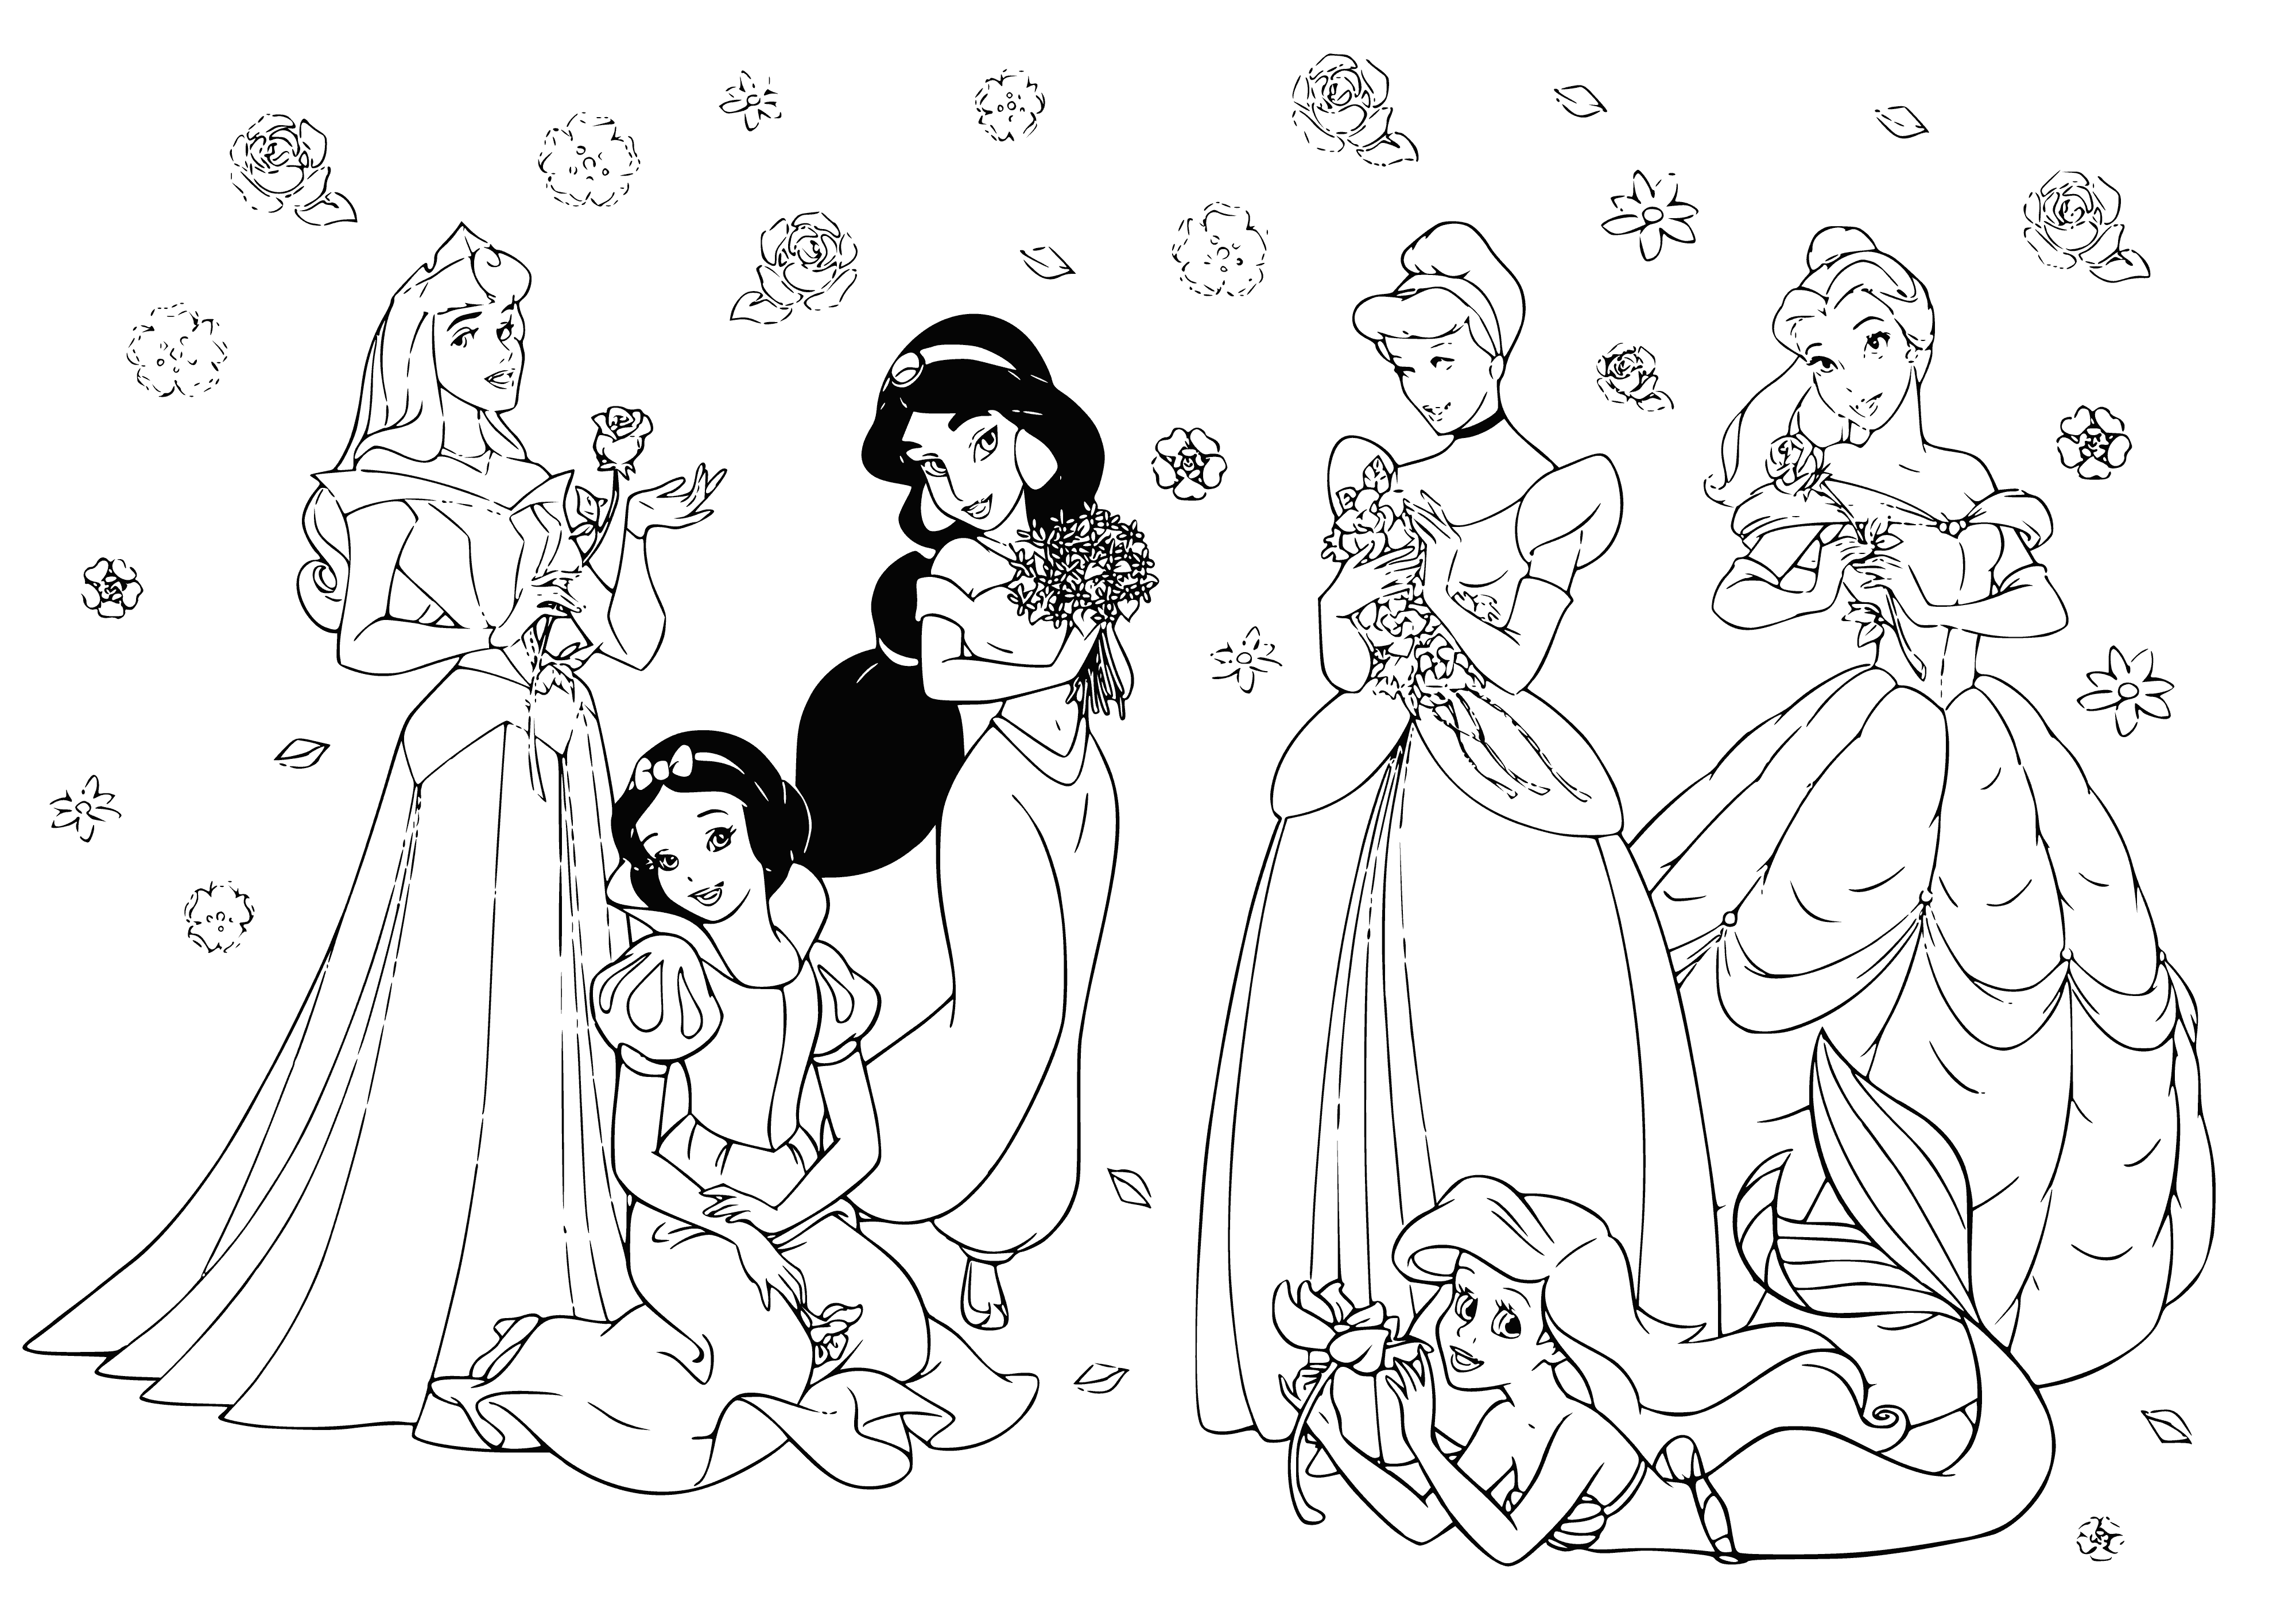 coloring page: Disney princesses Jasmine to Rapunzel wearing colorful dresses w/ unique hairstyles, accessories like headbands, necklaces, earrings, feather or quiver.